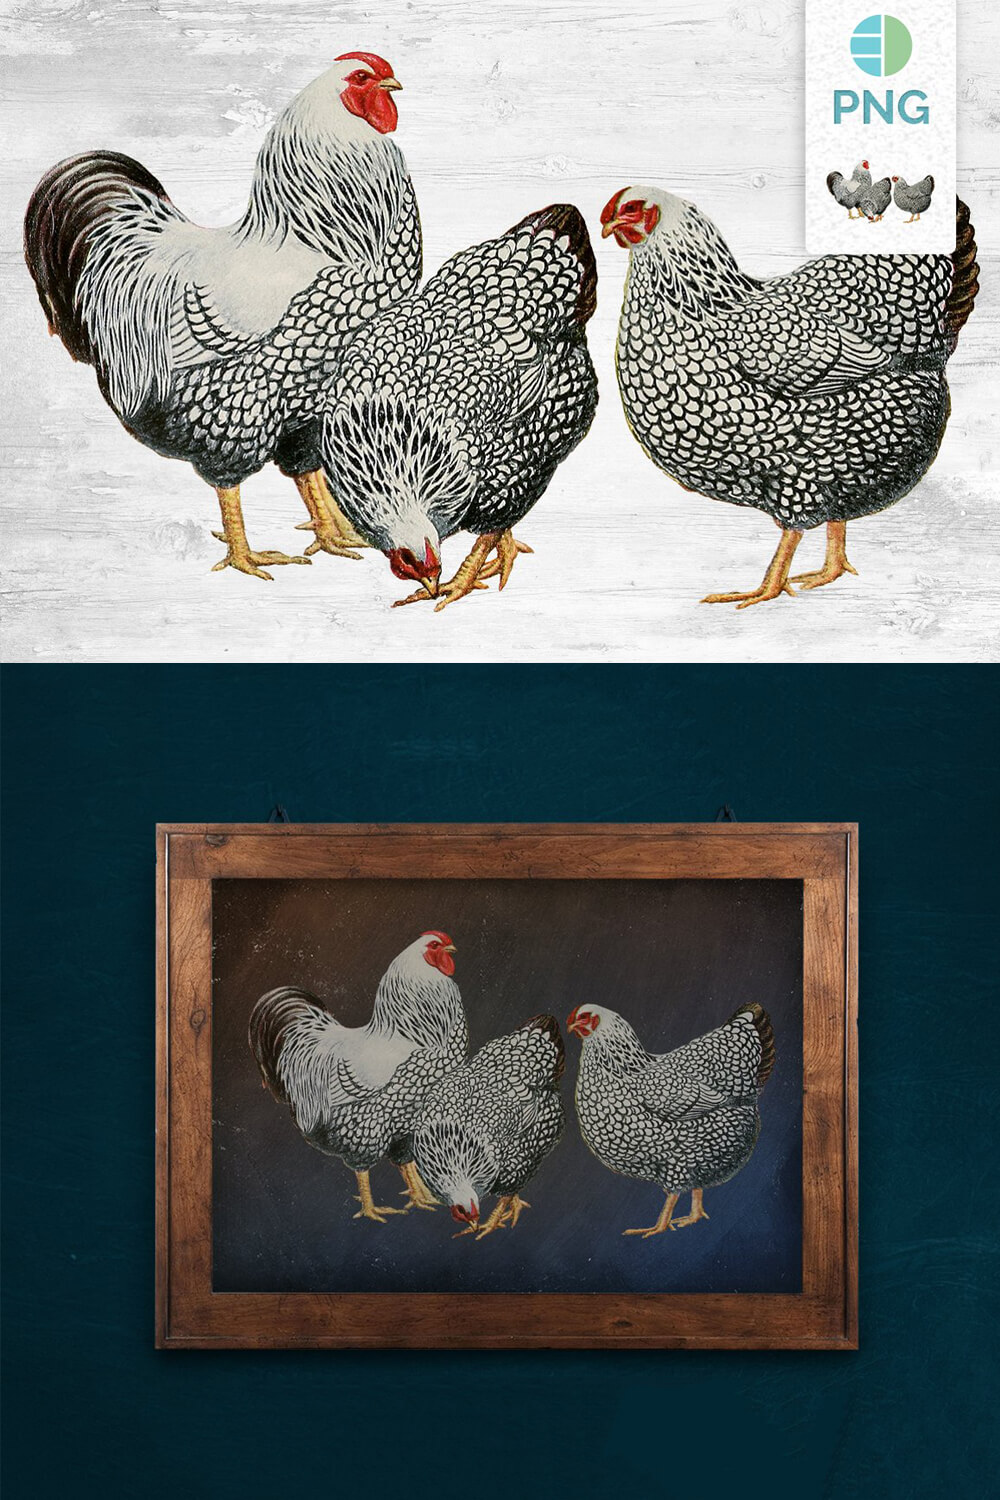 Two options for using the image of speckled chickens.